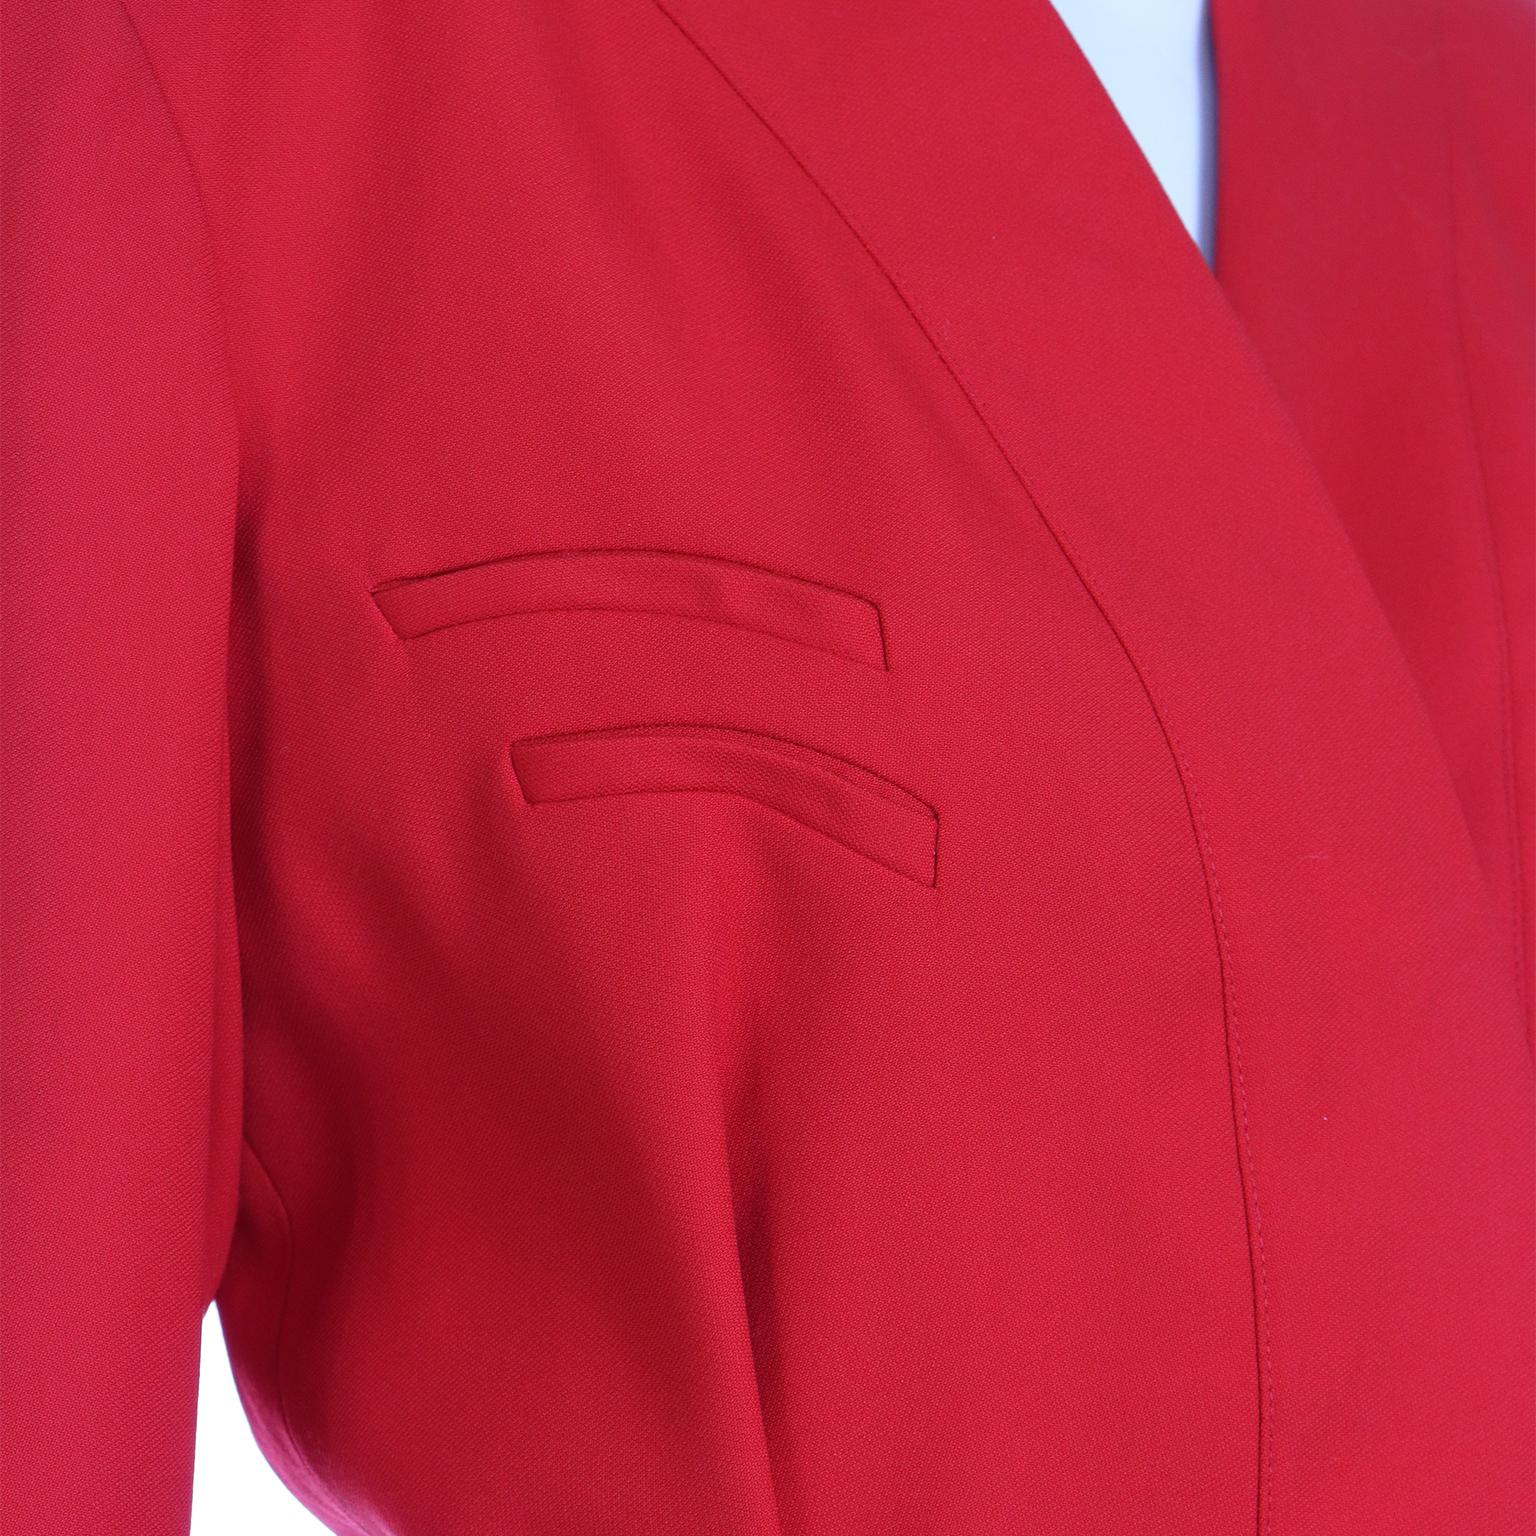 Vintage Red Thierry Mugler Jacket and Skirt Suit Deadstock w Tags 2